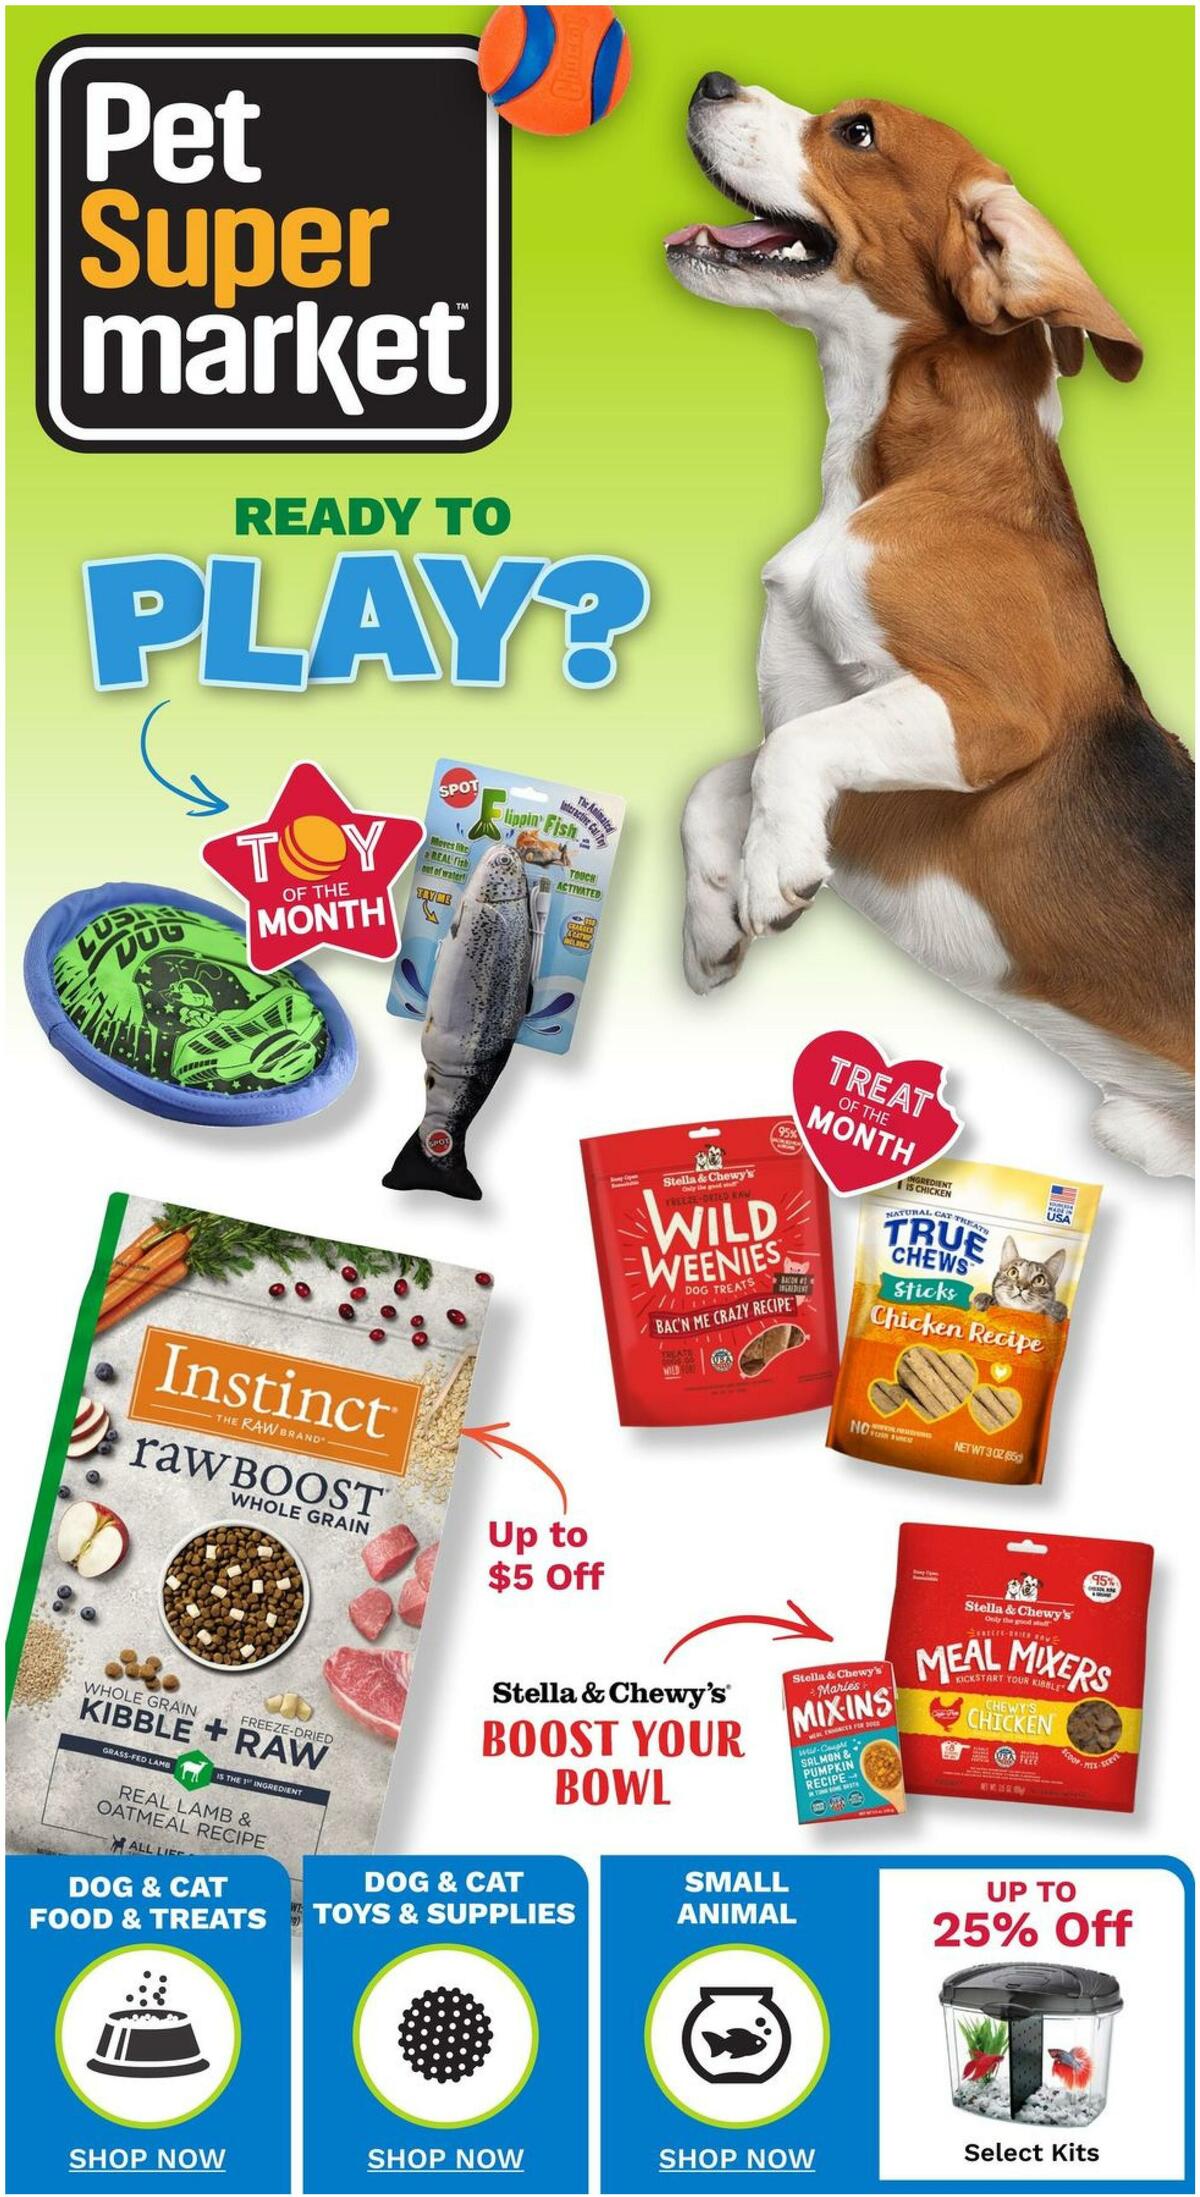 Pet Supermarket April Specials Weekly Ad from April 5